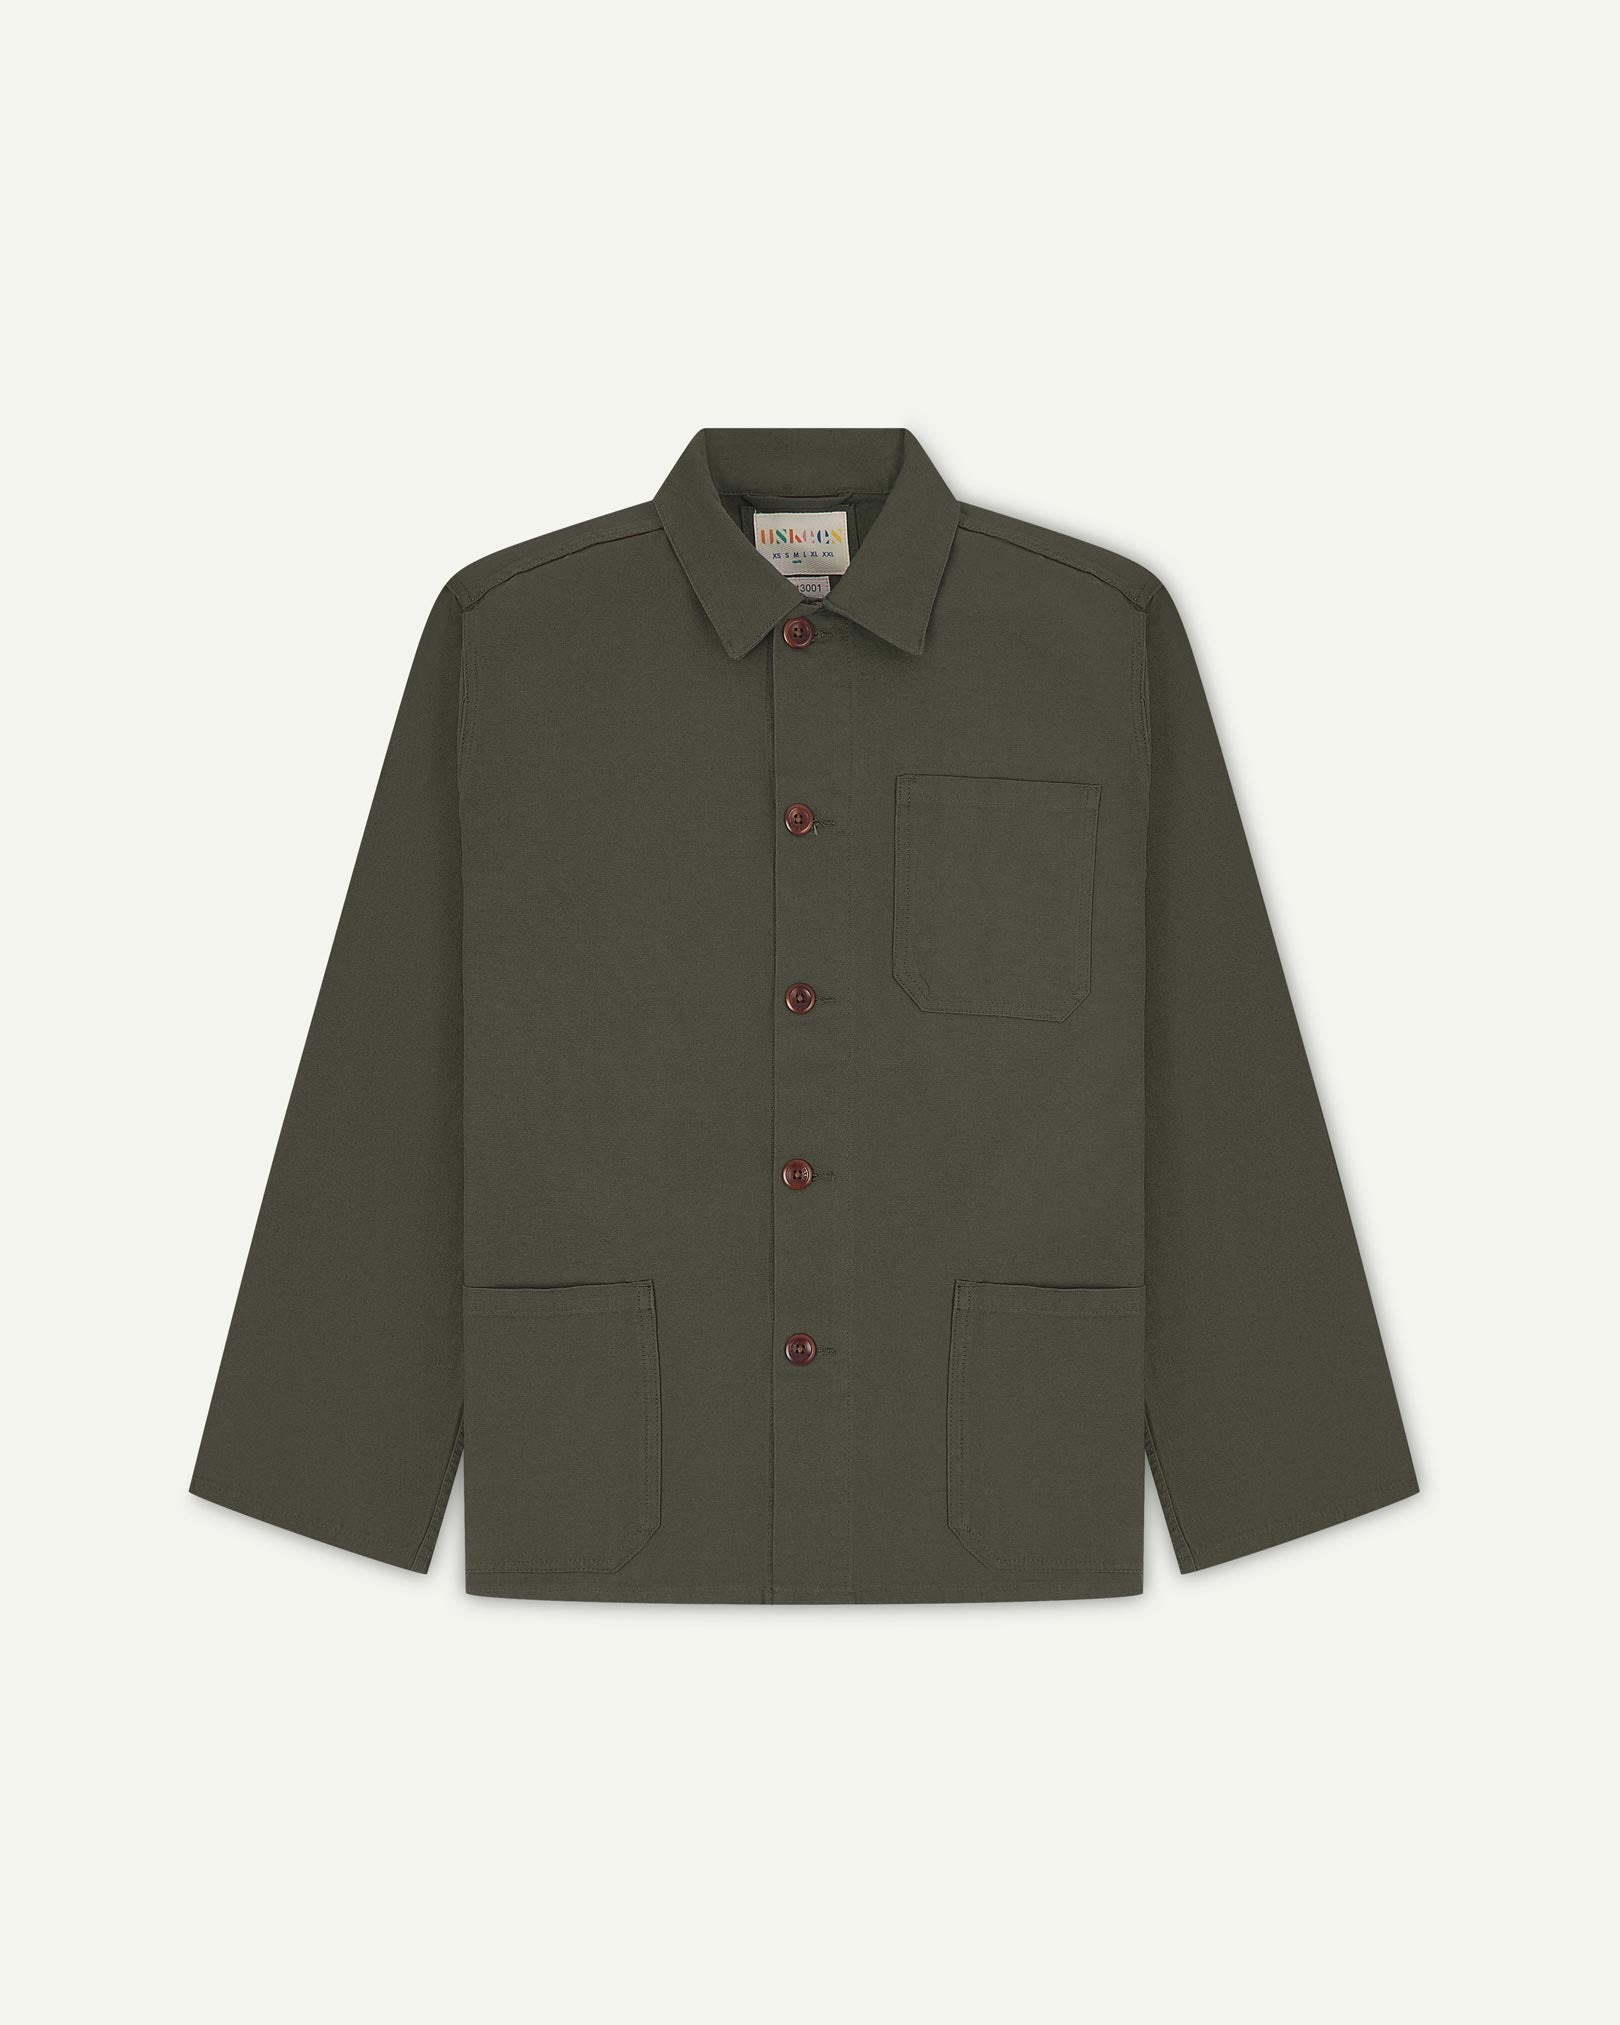 Front flat shot of vine green, buttoned organic cotton overshirt. Clear view of chest and hip pockets, corozo buttons and Uskees branding label.